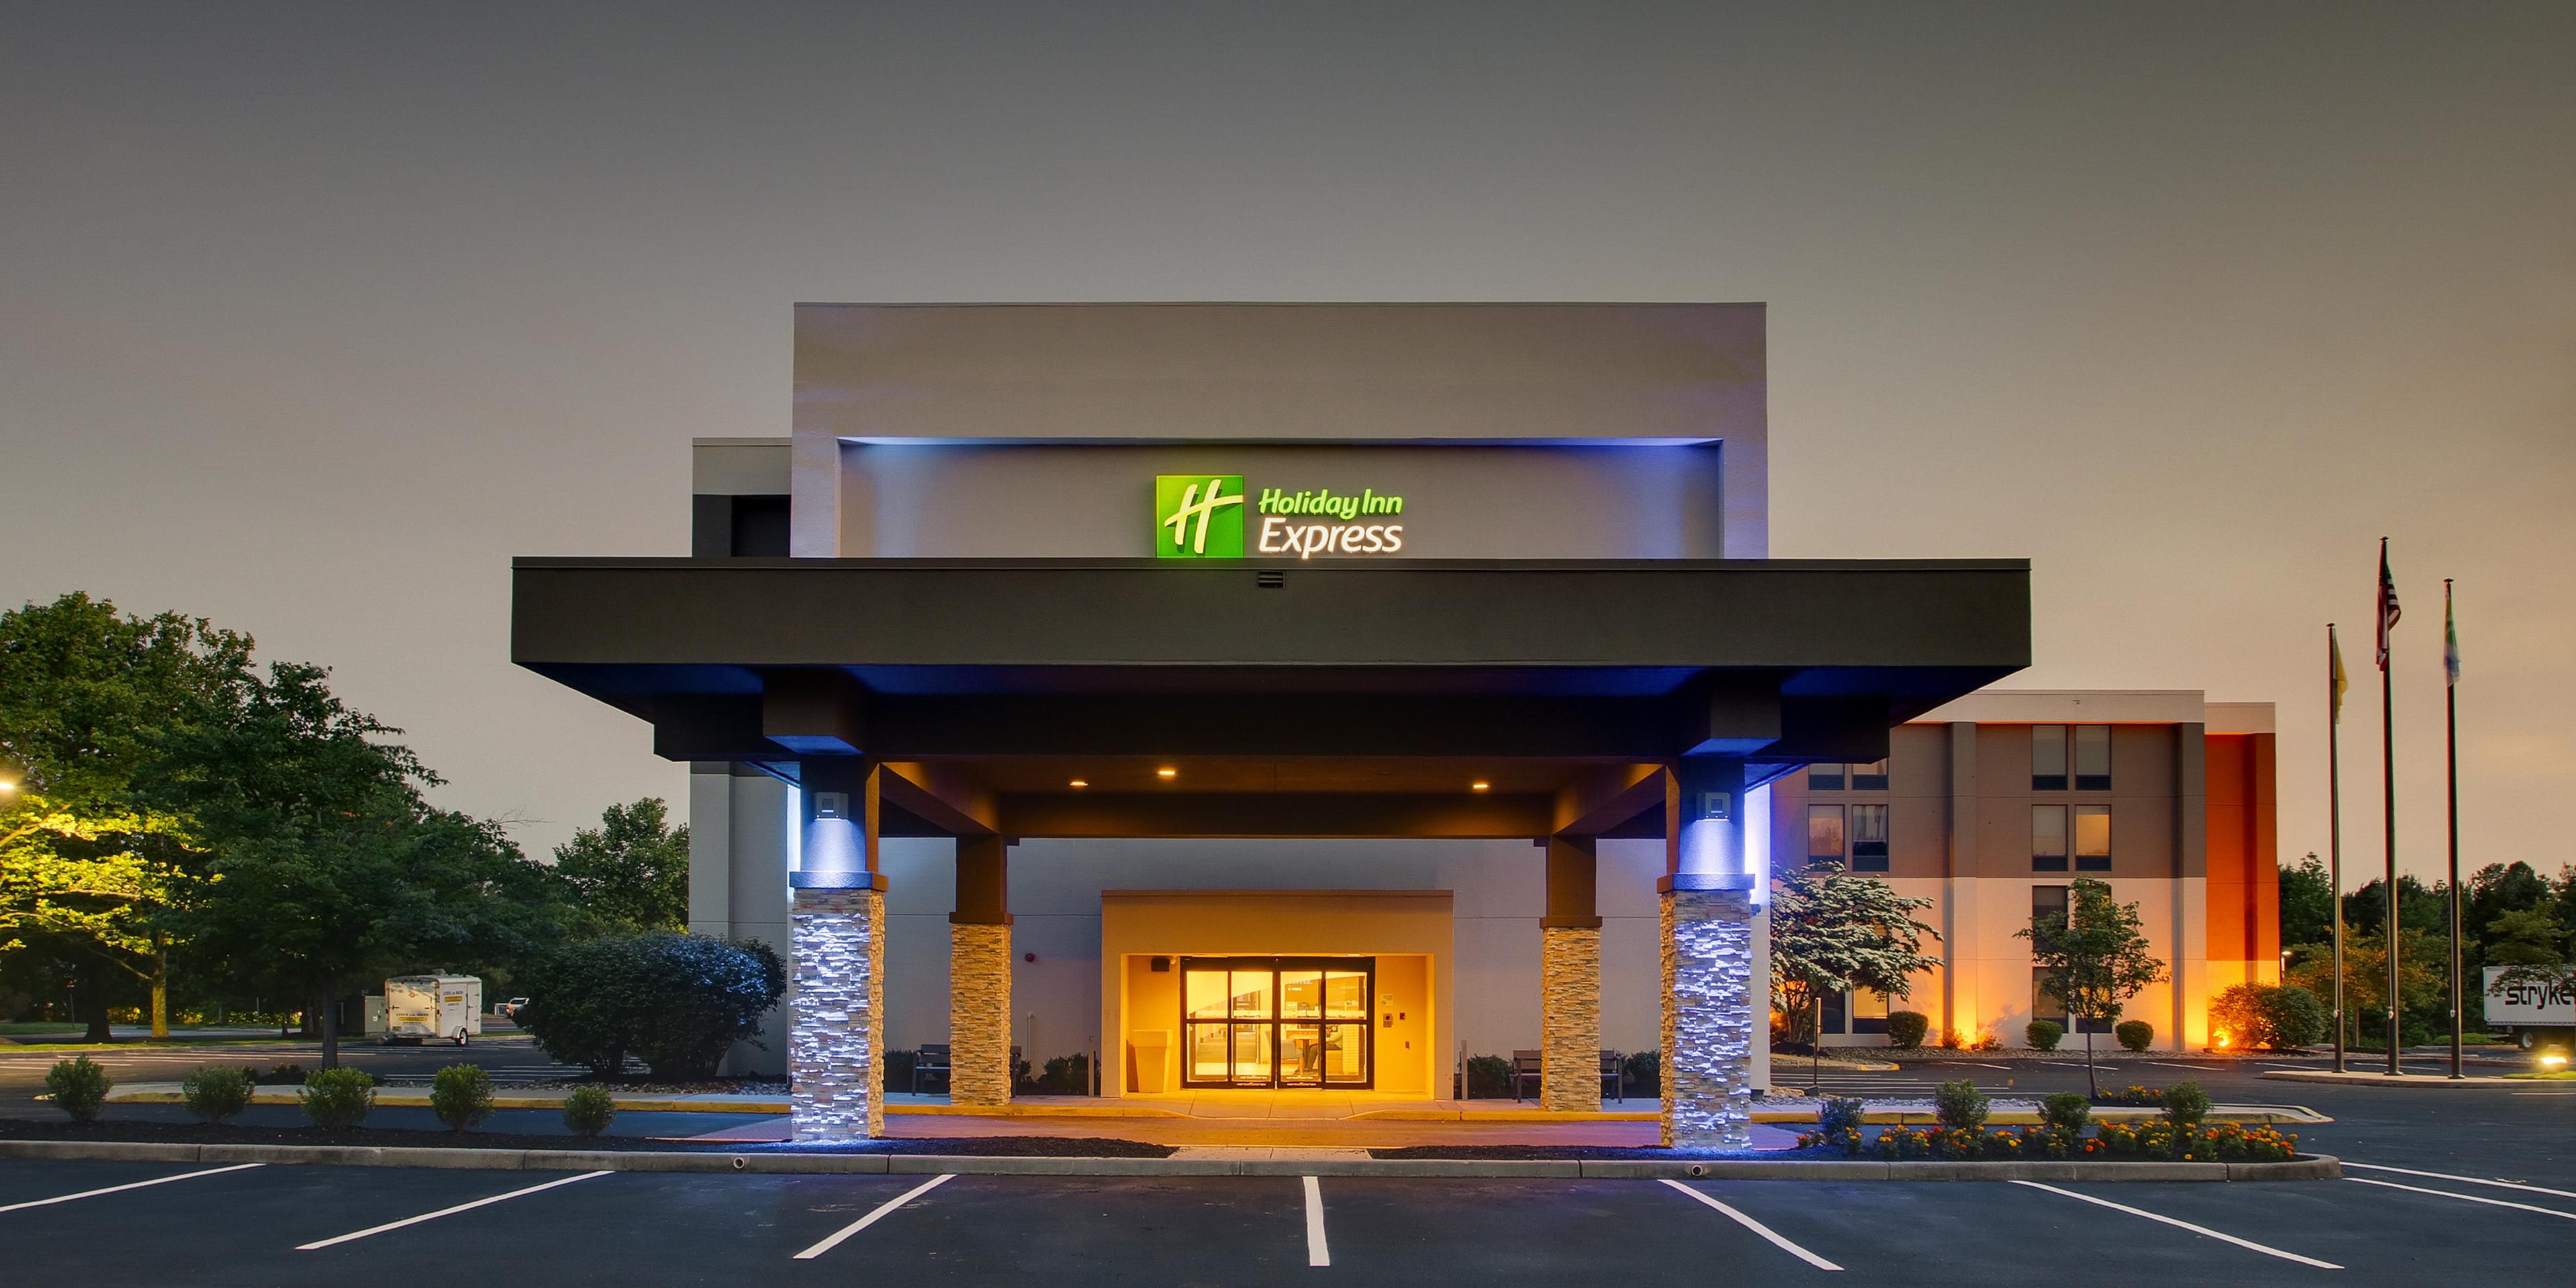 Come and enjoy a relaxing stay at the Holiday Inn Express Voorhees/Mt. Laurel and enjoy our daily breakfast, comfy rooms and friendly staff.